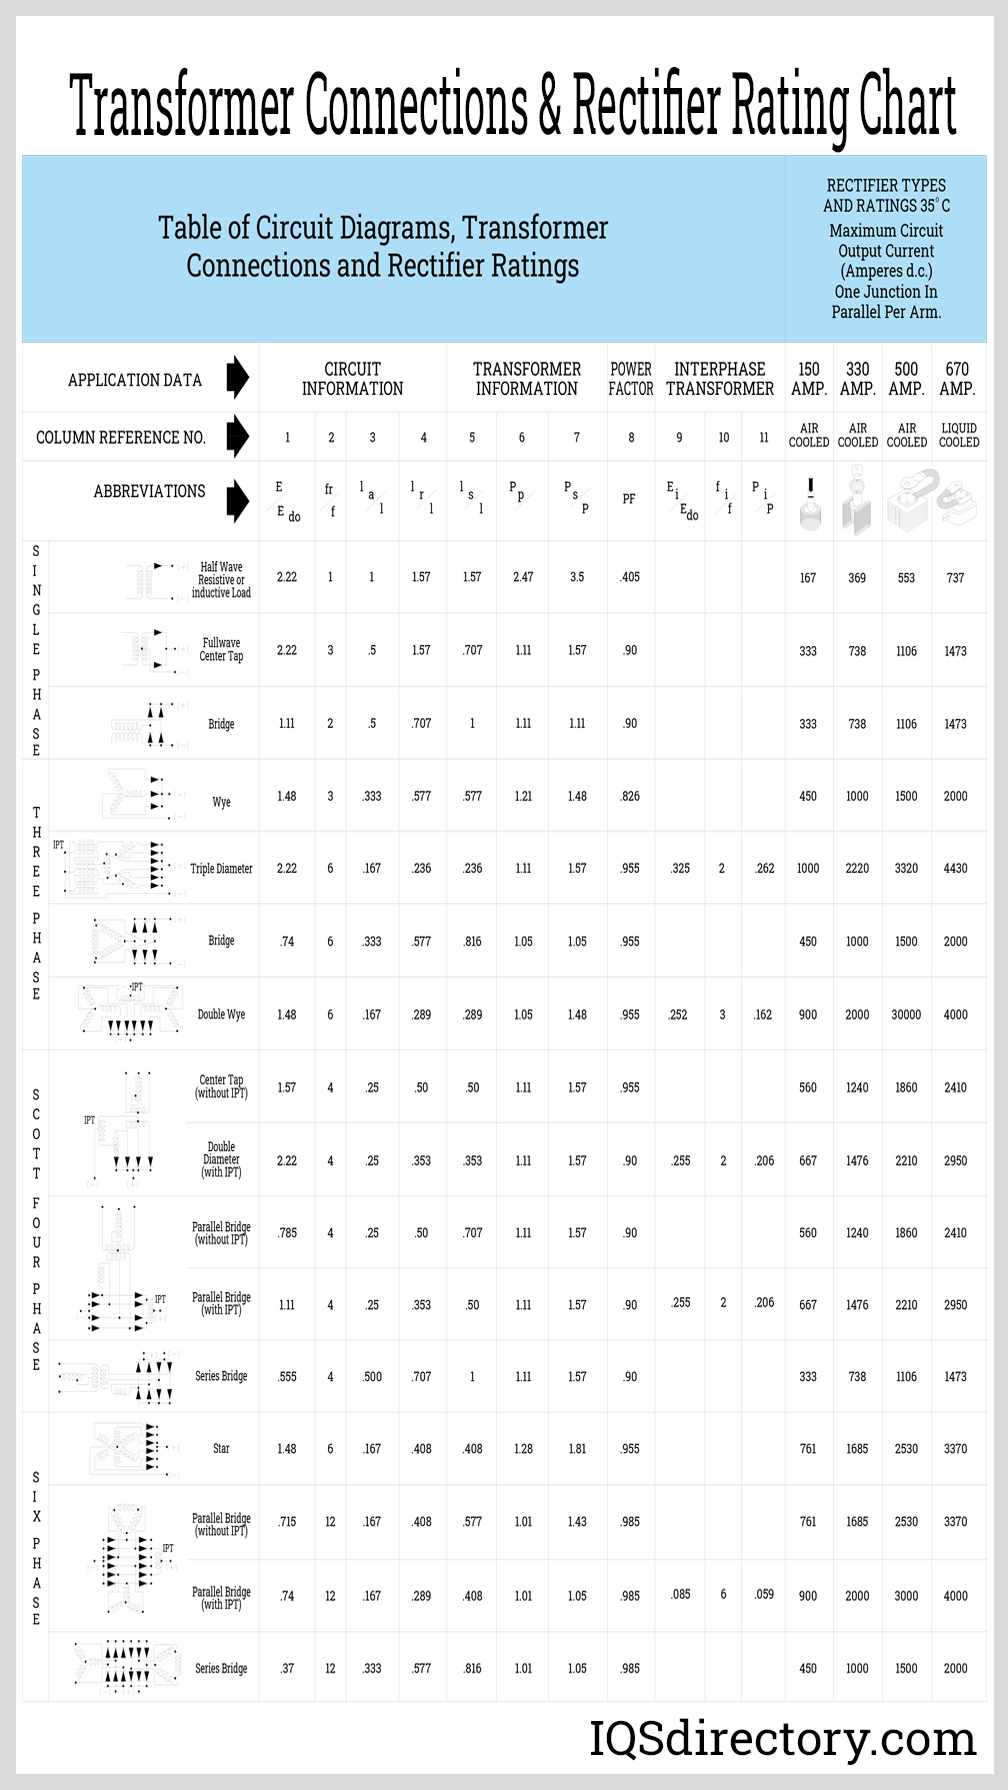 Transformer Connections and Rectifier Rating Chart